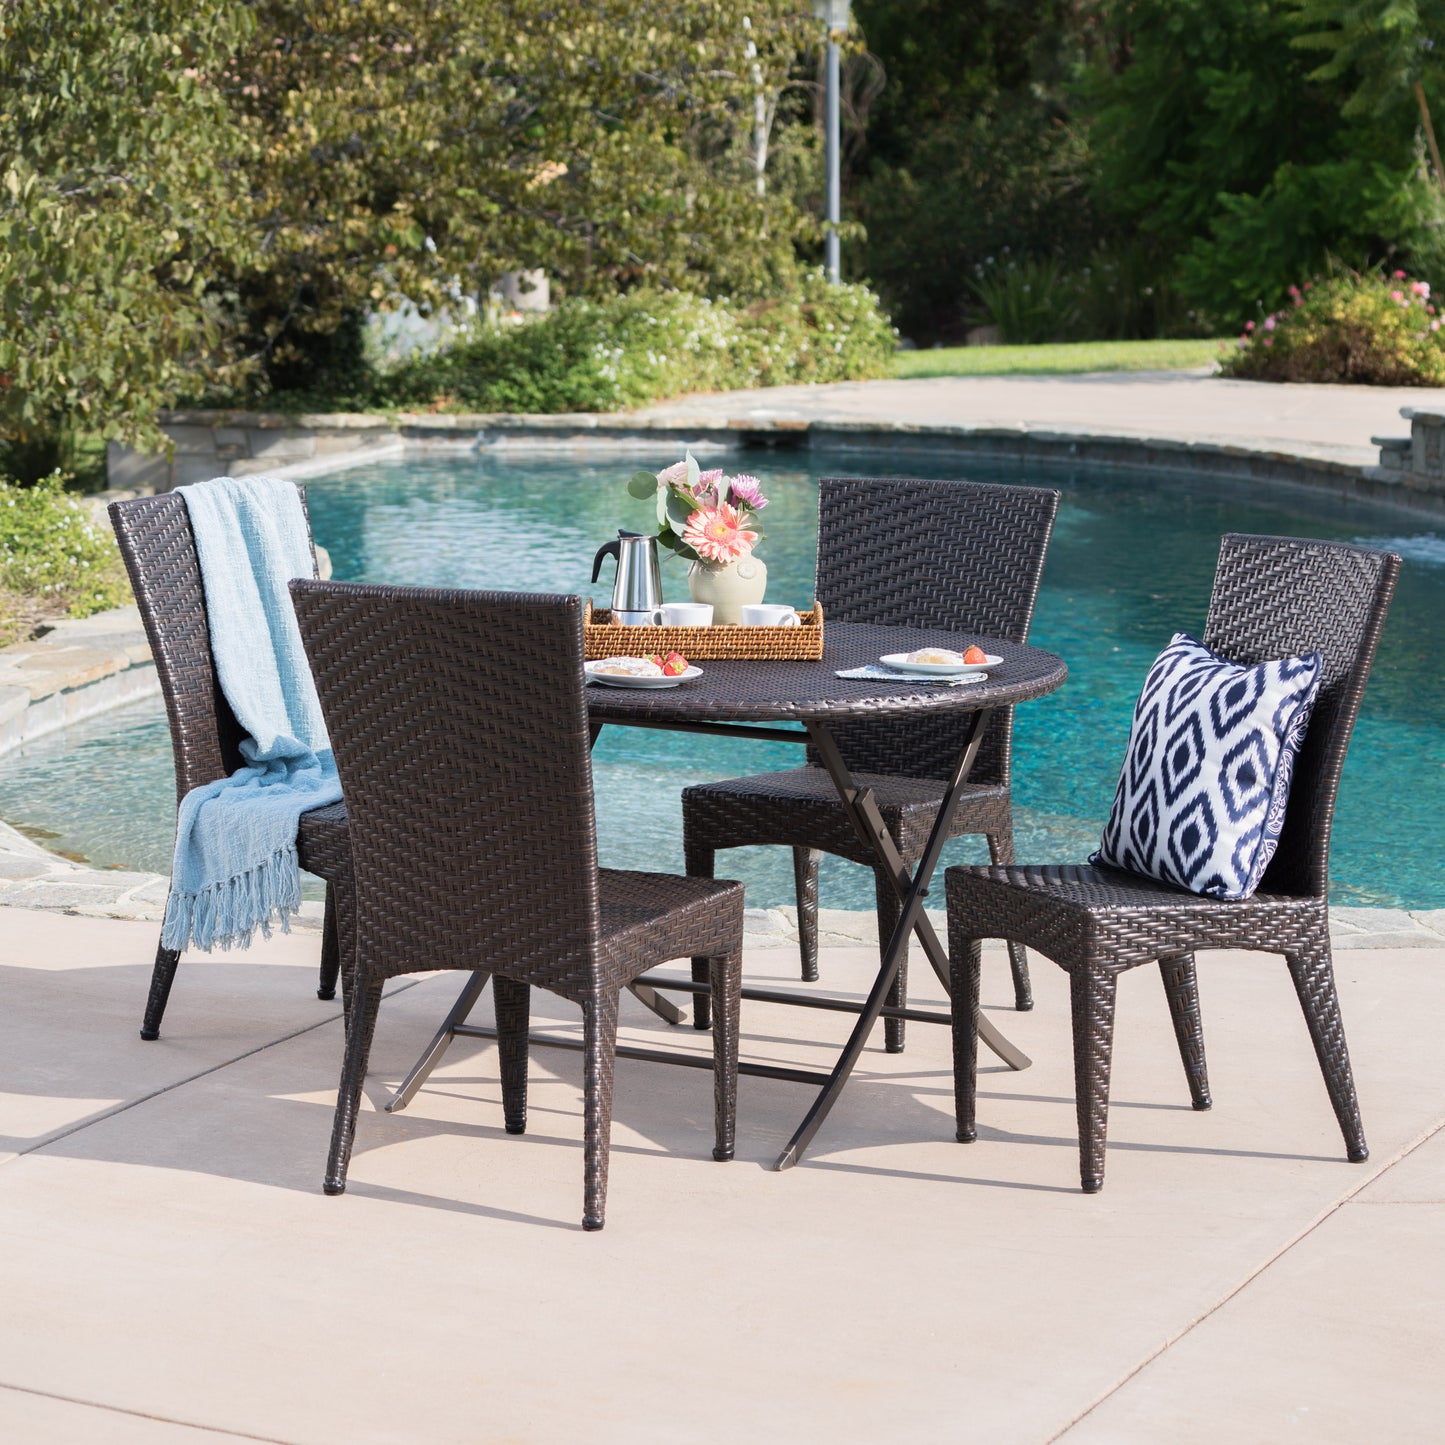 Abbey Outdoor 5 Piece Multi-Brown Wicker Dining Set with Foldable Table